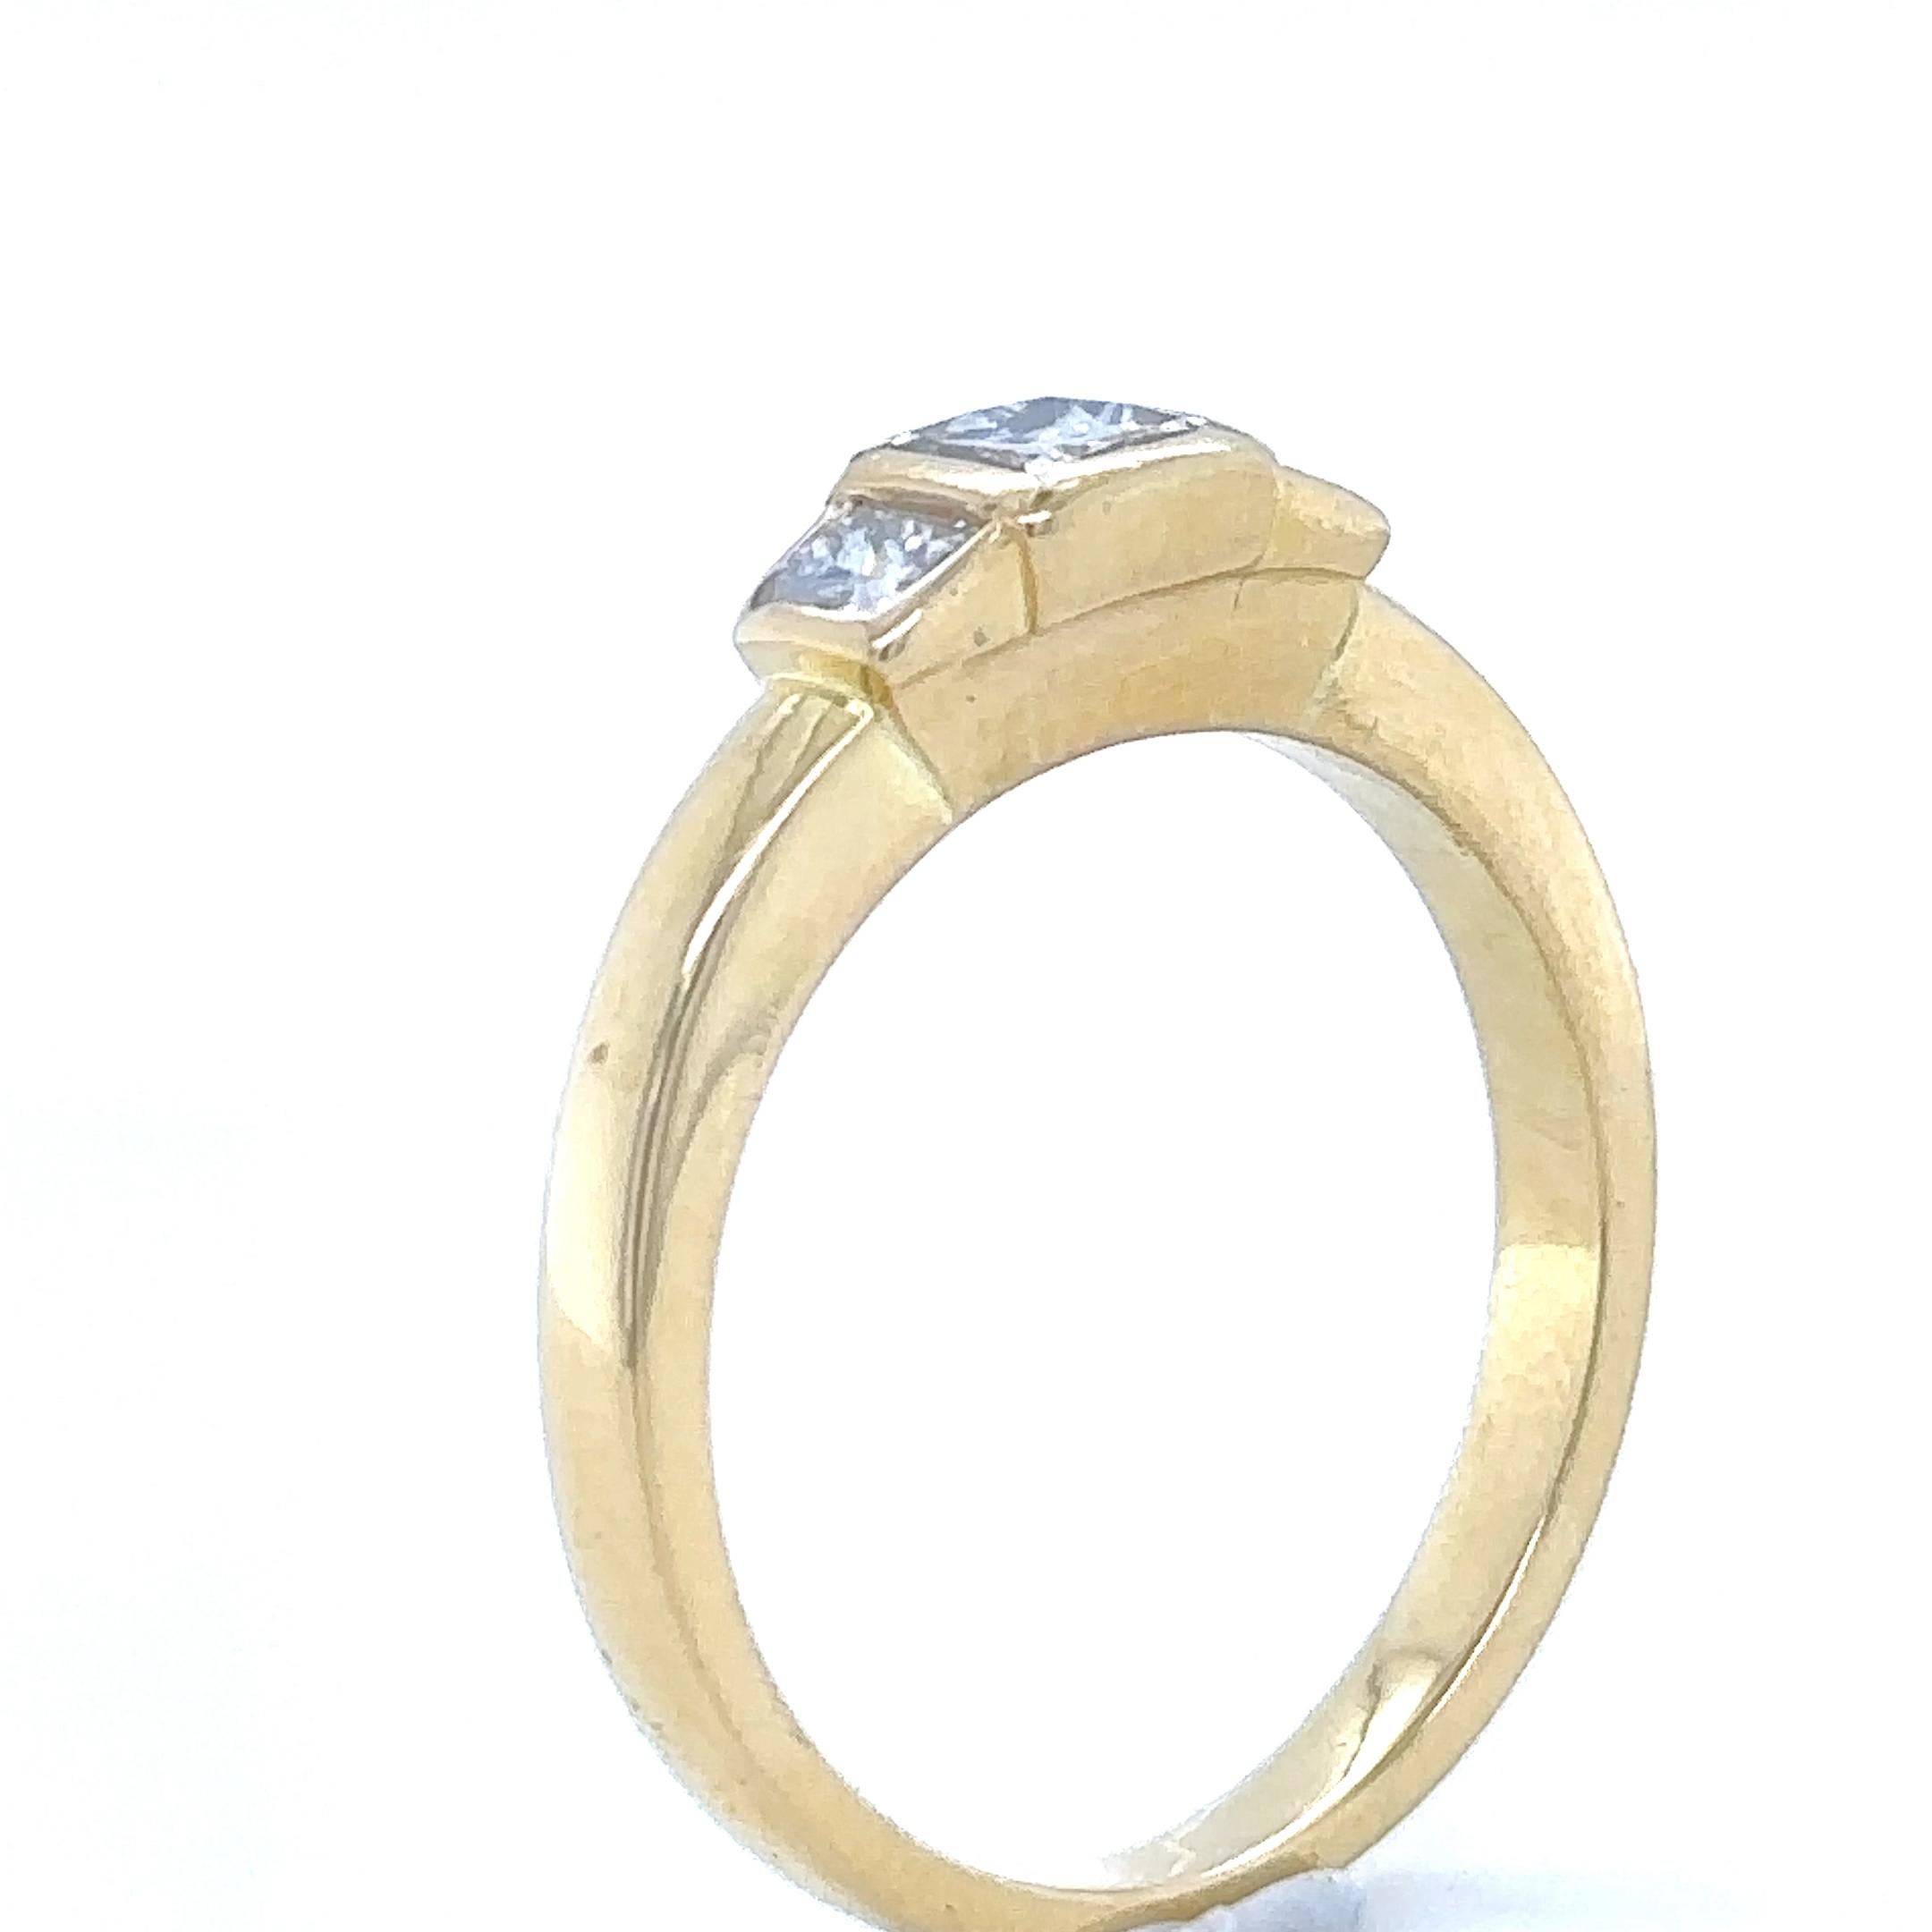 A Princess Cut Diamond Ring, bezel set in 18ct yellow gold with a princess cut diamond on each shoulder on a 2.4mm band.

Diamonds 1 = 0.40ct (estimated), Graded in setting as Colour: G to H, Clarity: VS

Diamonds 2 = 0.30ct (estimated), Graded in